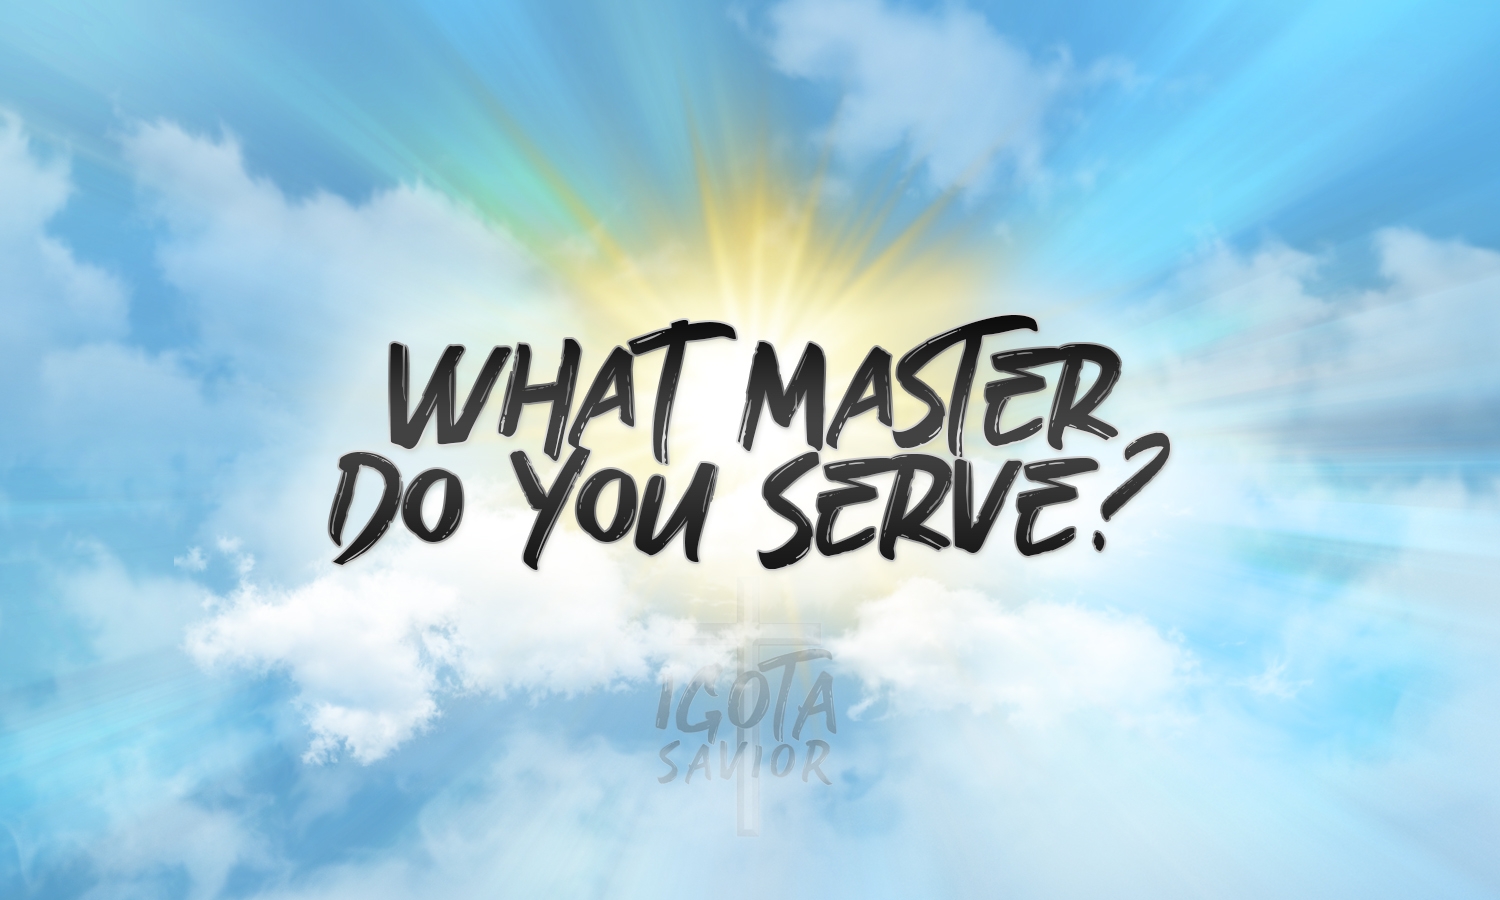 What Master Do You Serve?